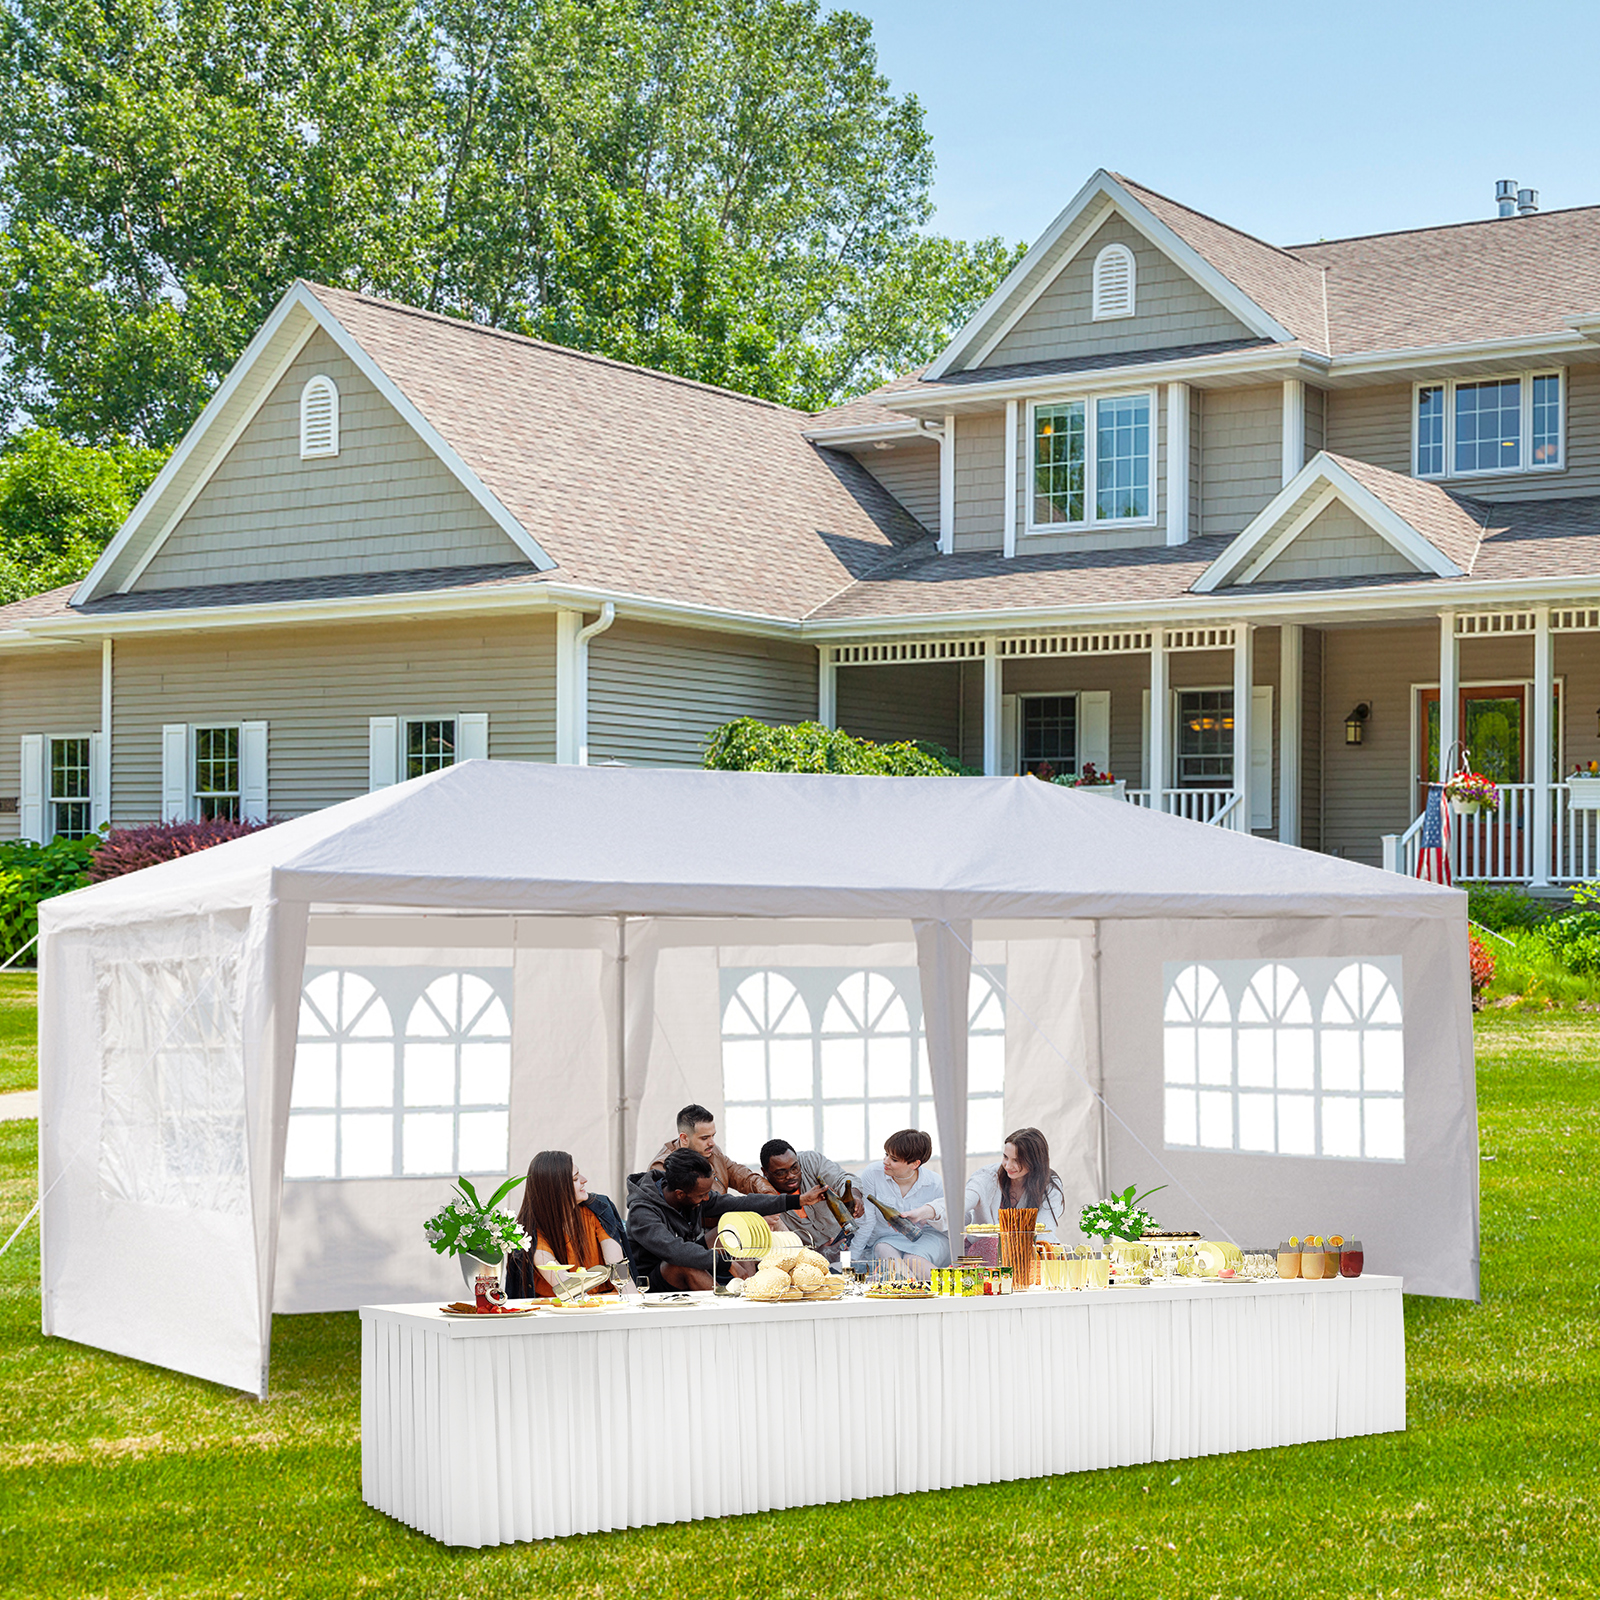 Ktaxon 10'x 20' Party Tent Outdoor Gazebo Wedding Canopy Tent with Sides White - image 2 of 9